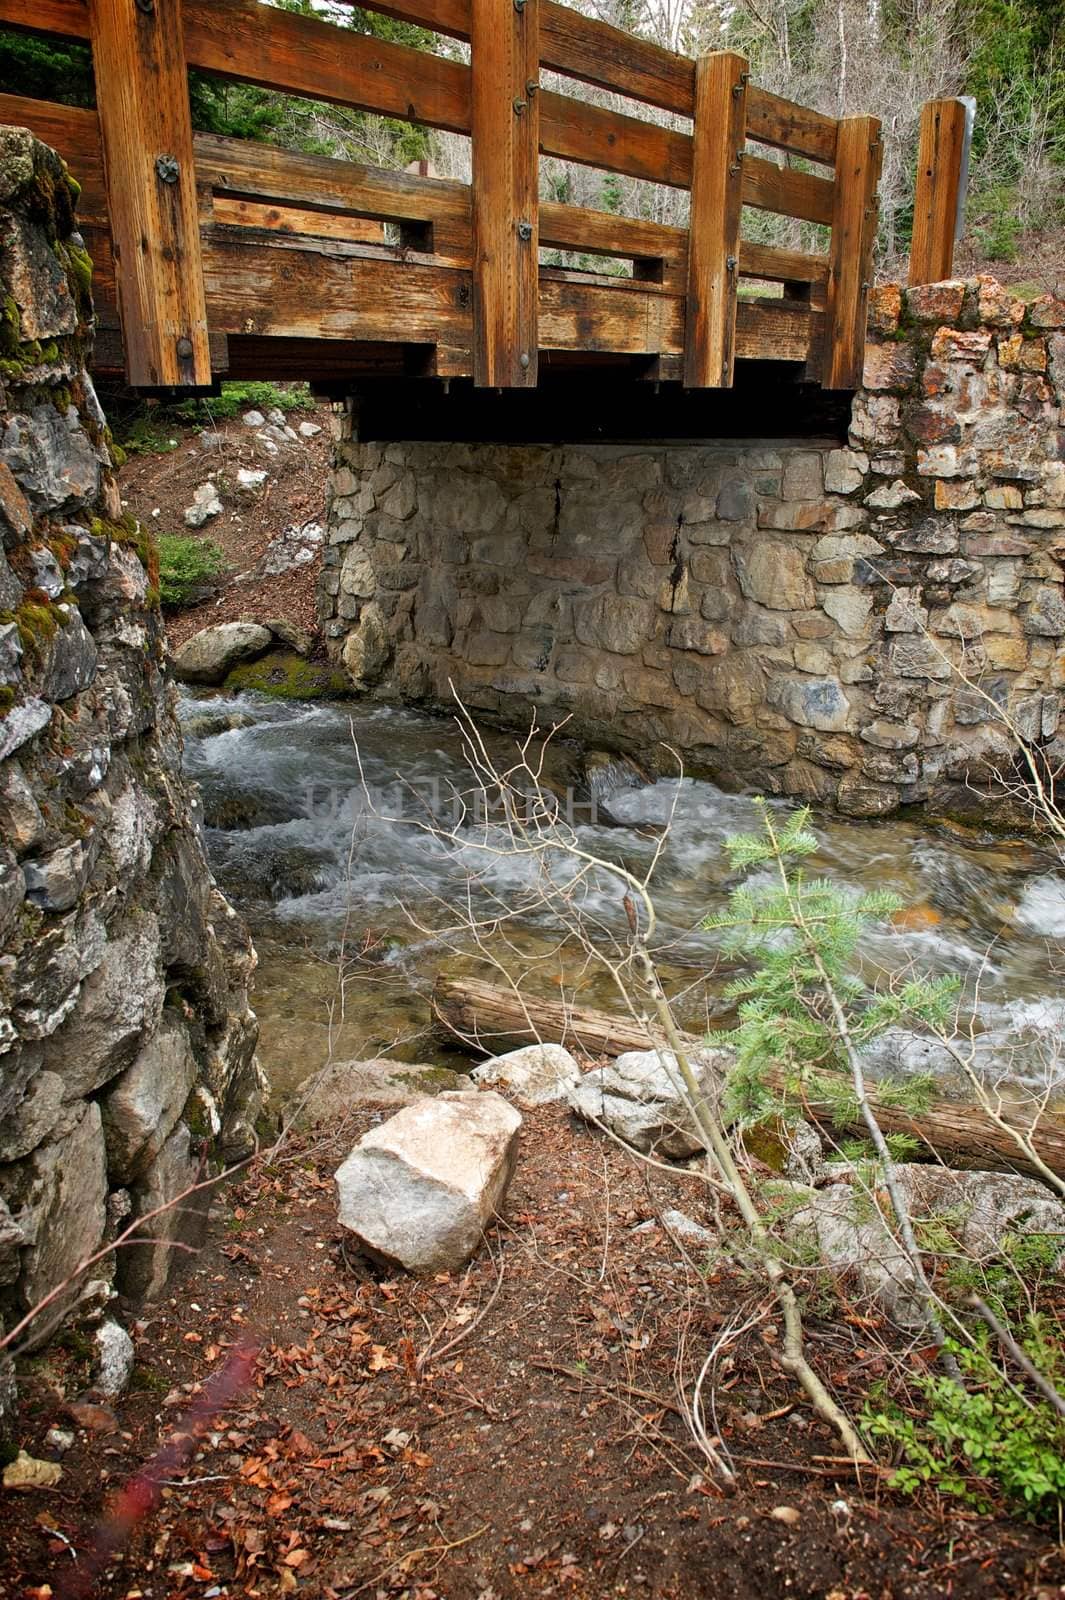 Wooden Bridge Between Stone Walls and Stream by pixelsnap